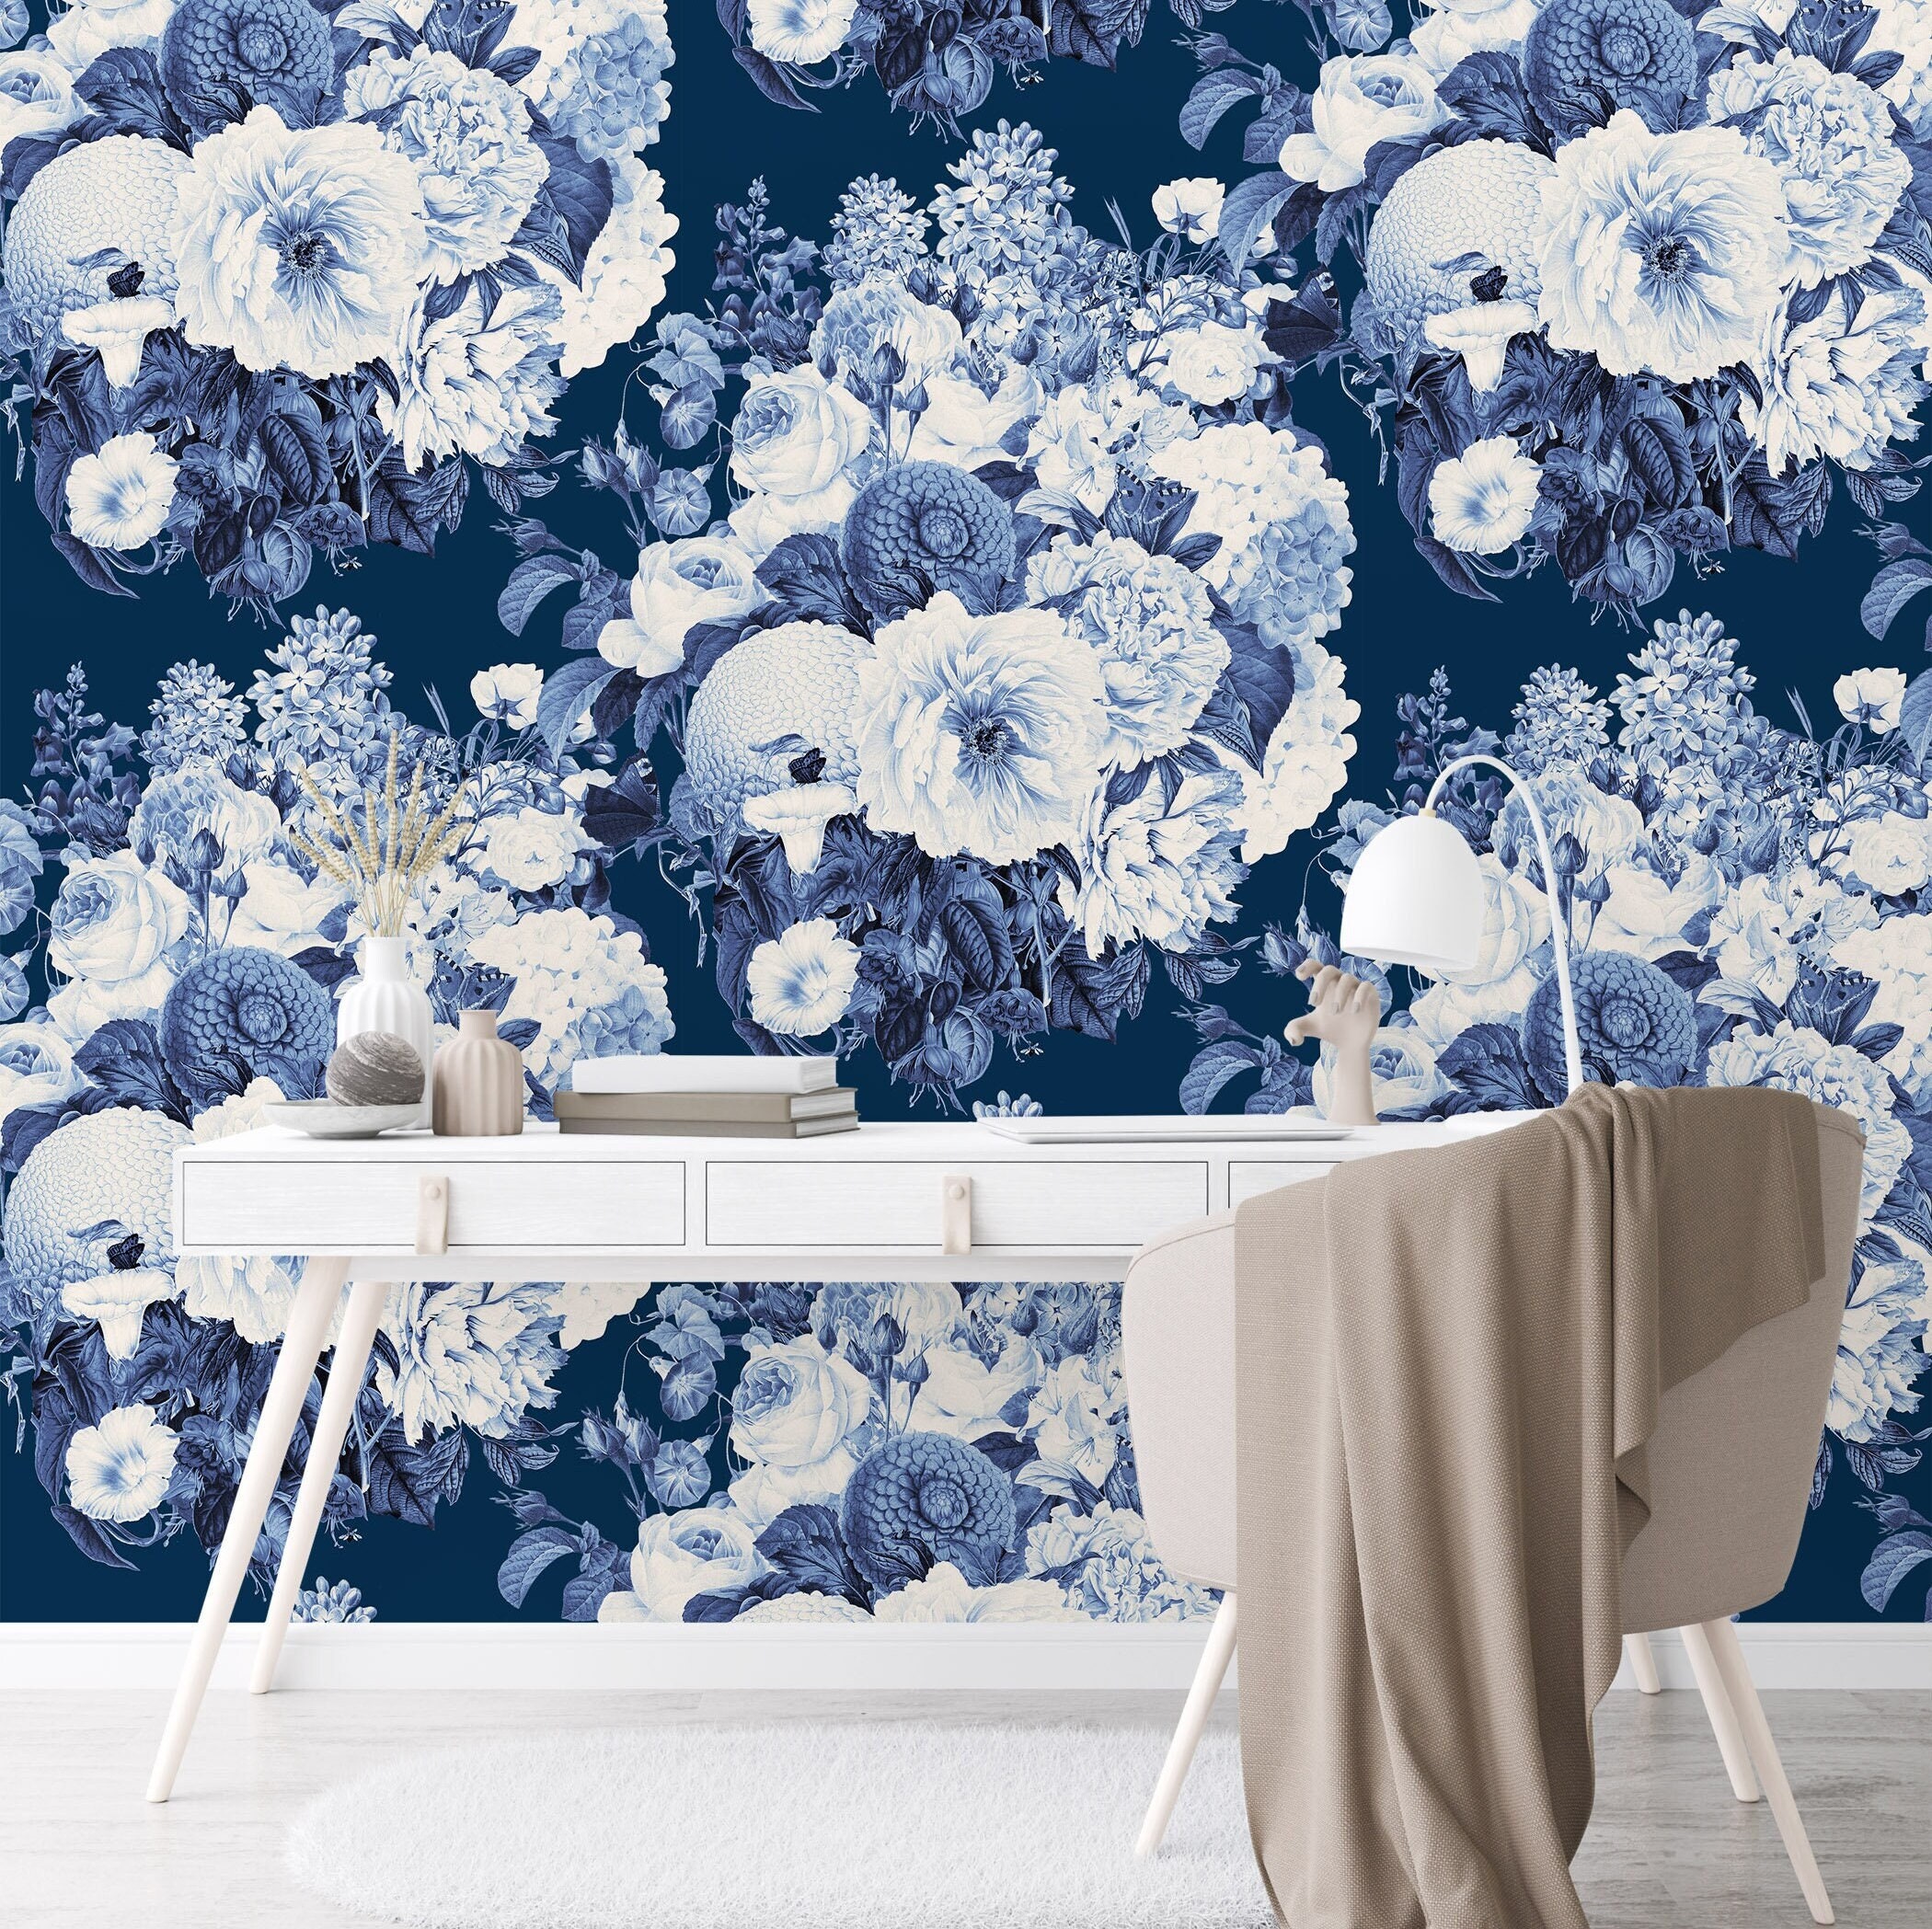 White and Navy Blue Floral Wallpaper - Etsy